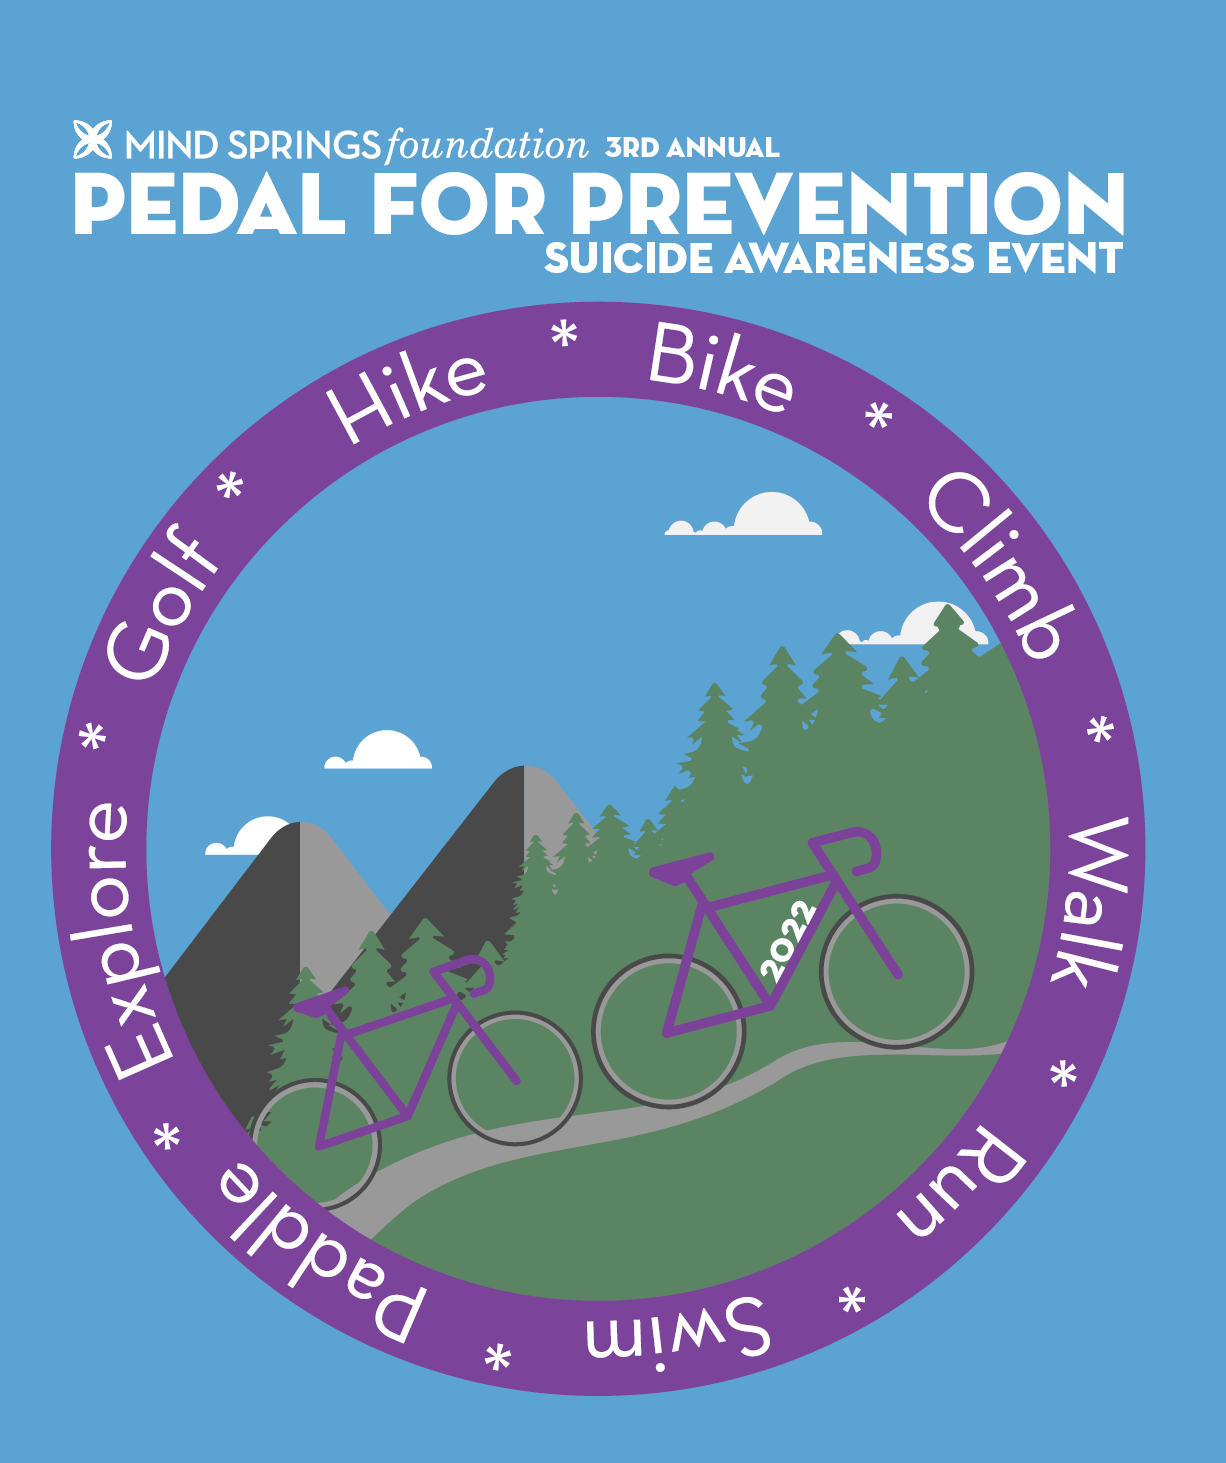 Pedal for Prevention